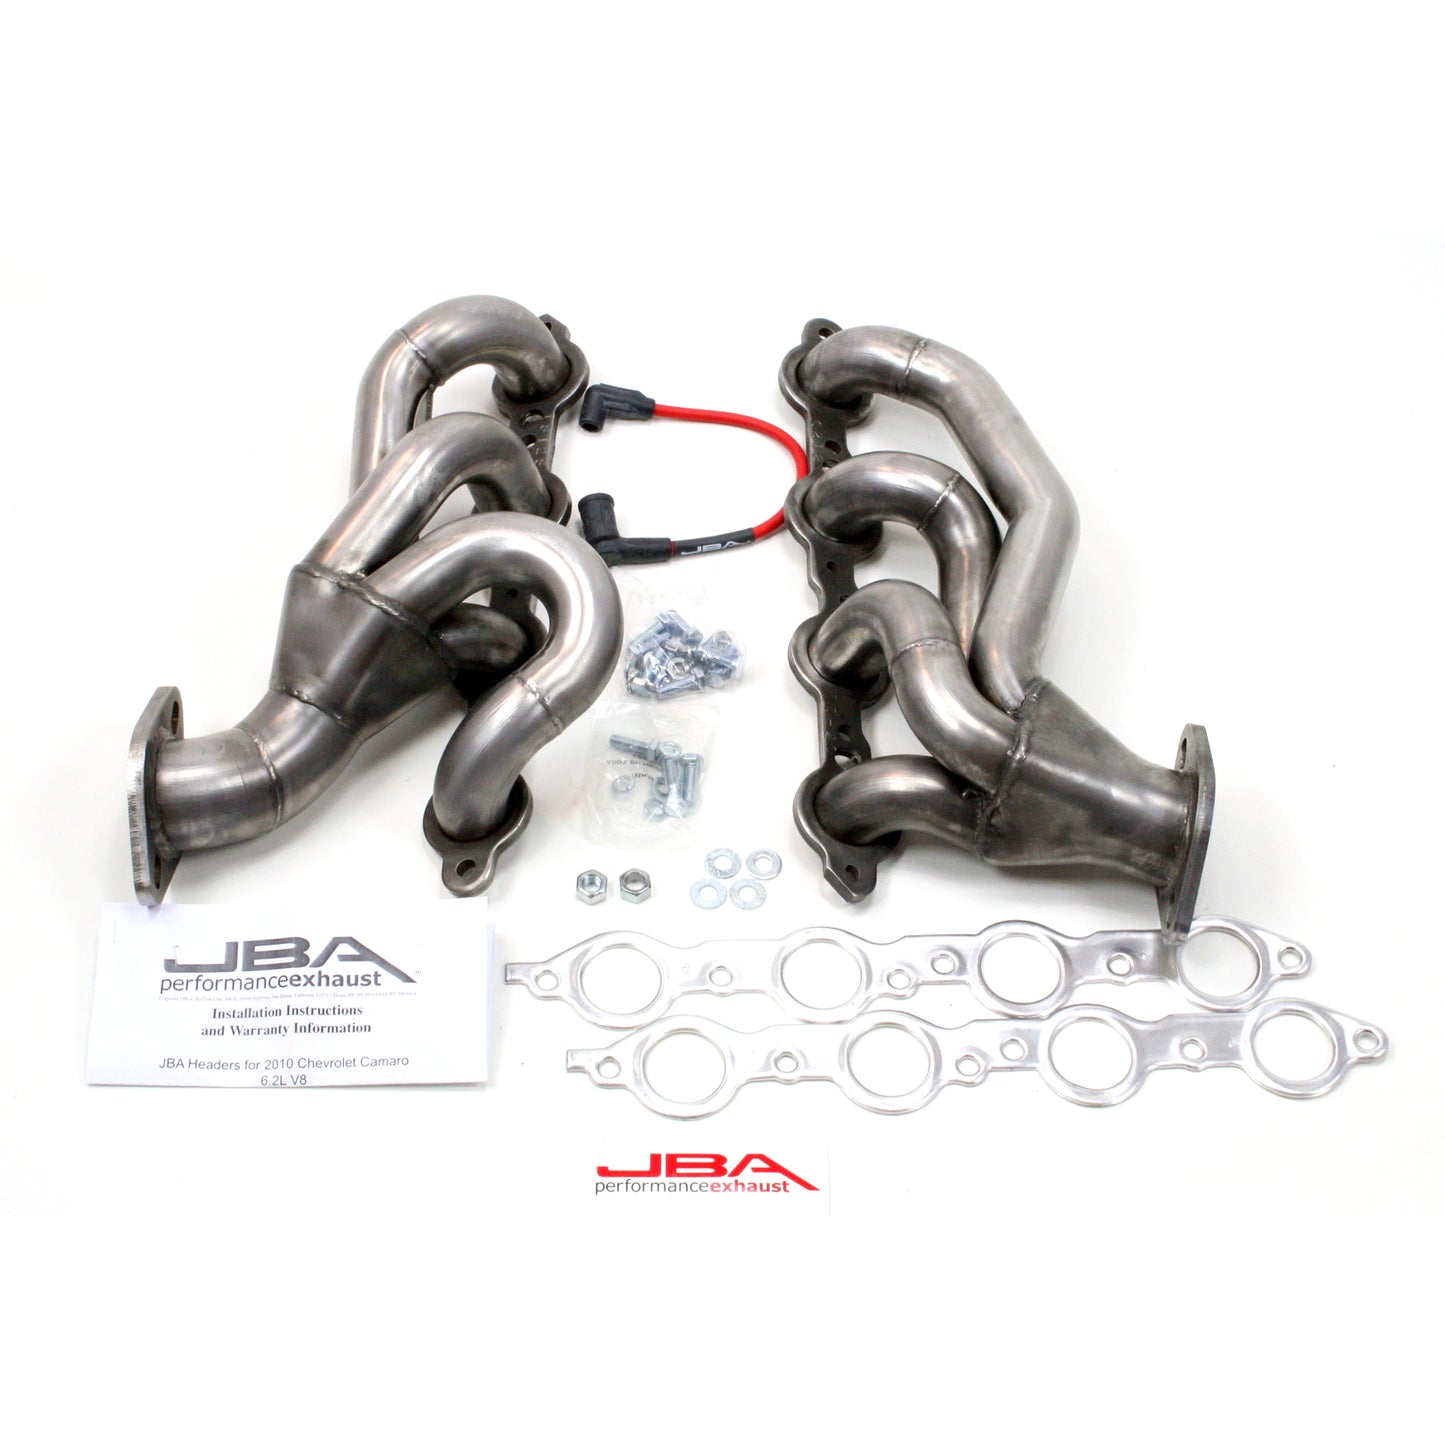 JBA Performance Exhaust 1813S Header Shorty Stainless Steel 2014-2017 Chevy SS 6.2L